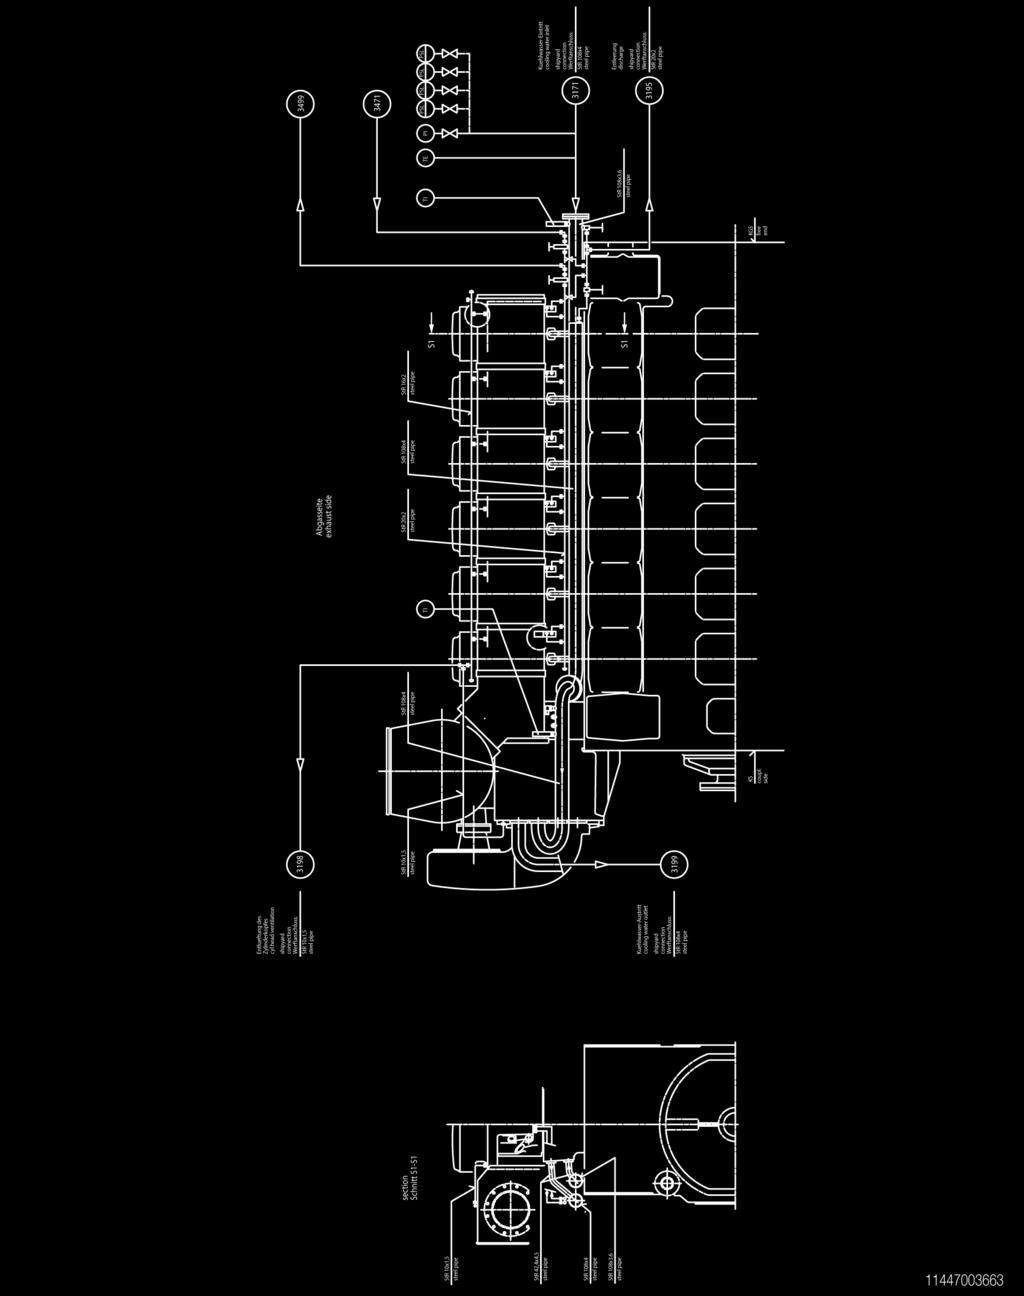 MAN Diesel & Turbo 2 Internal cooling water system Exemplary Figure 28: Internal cooling water system, L engine Exemplary Note: The drawing shows the basic internal media flow of the